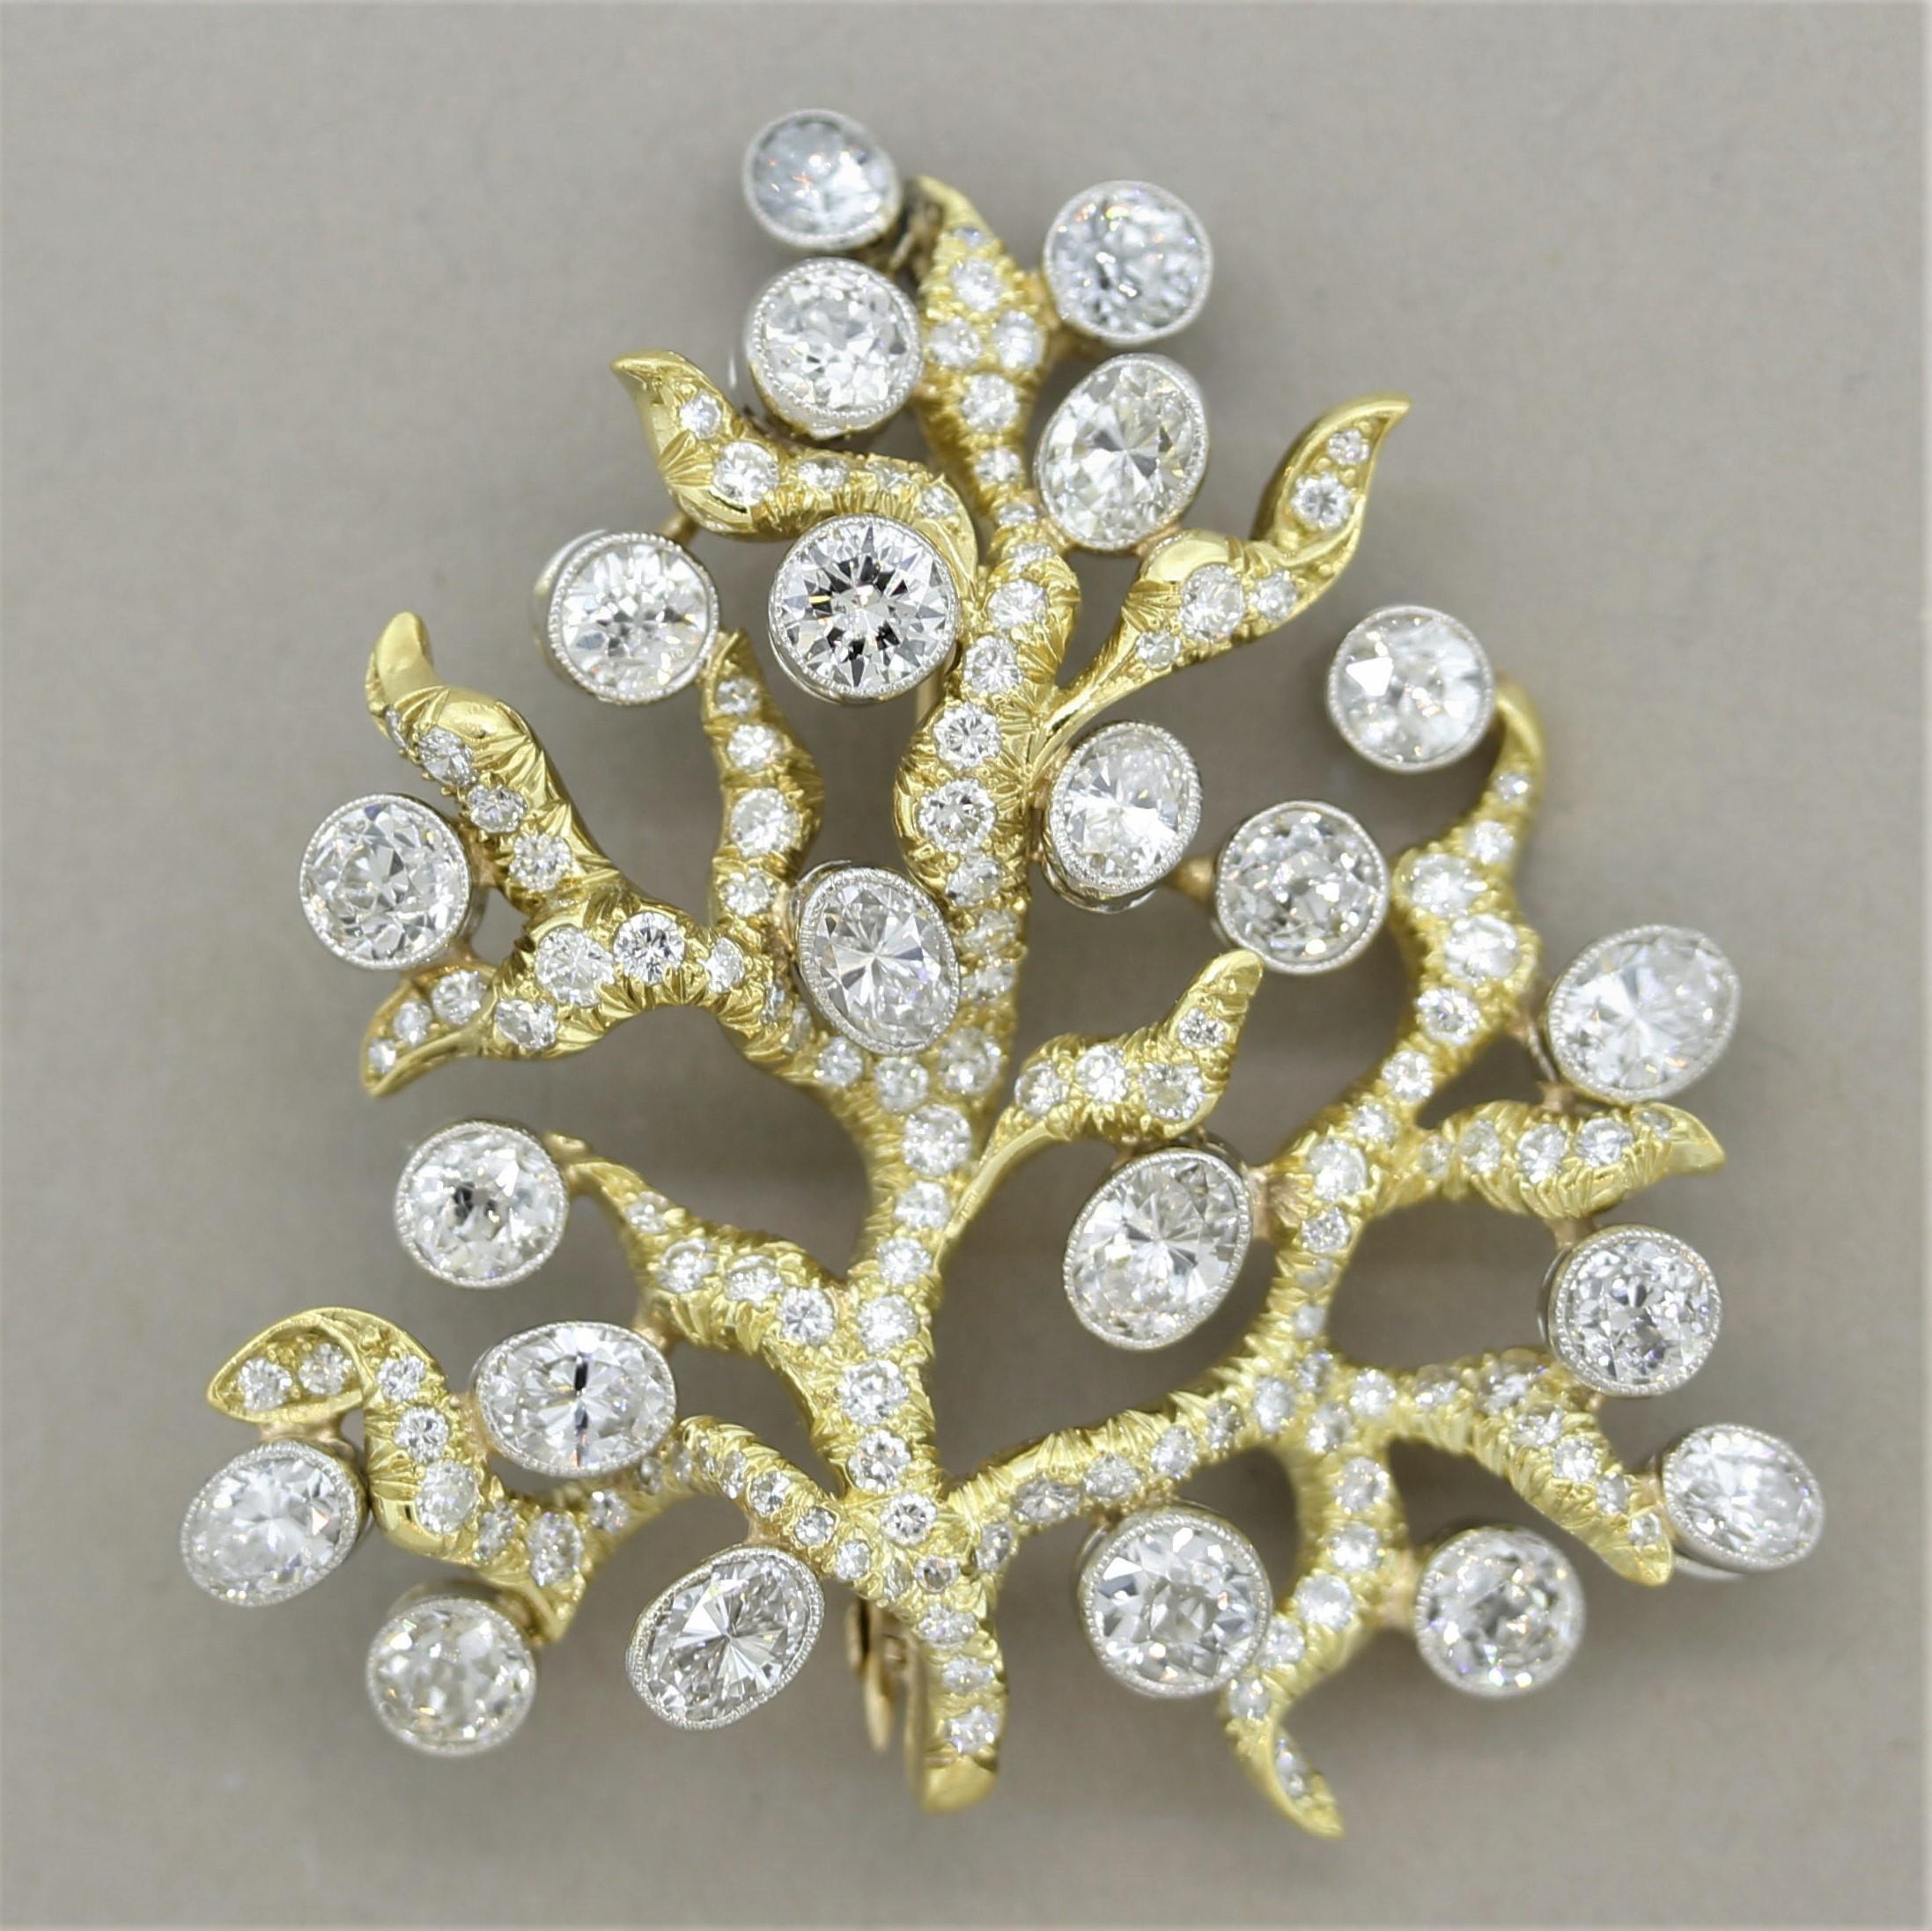 An original piece by the amazing Julius Cohen, famed jeweler based in New York. This unique brooch features approximately 6 carats of diamonds which are a mix of modern oval-shapes and round brilliant-cuts as well as larger old European-cut